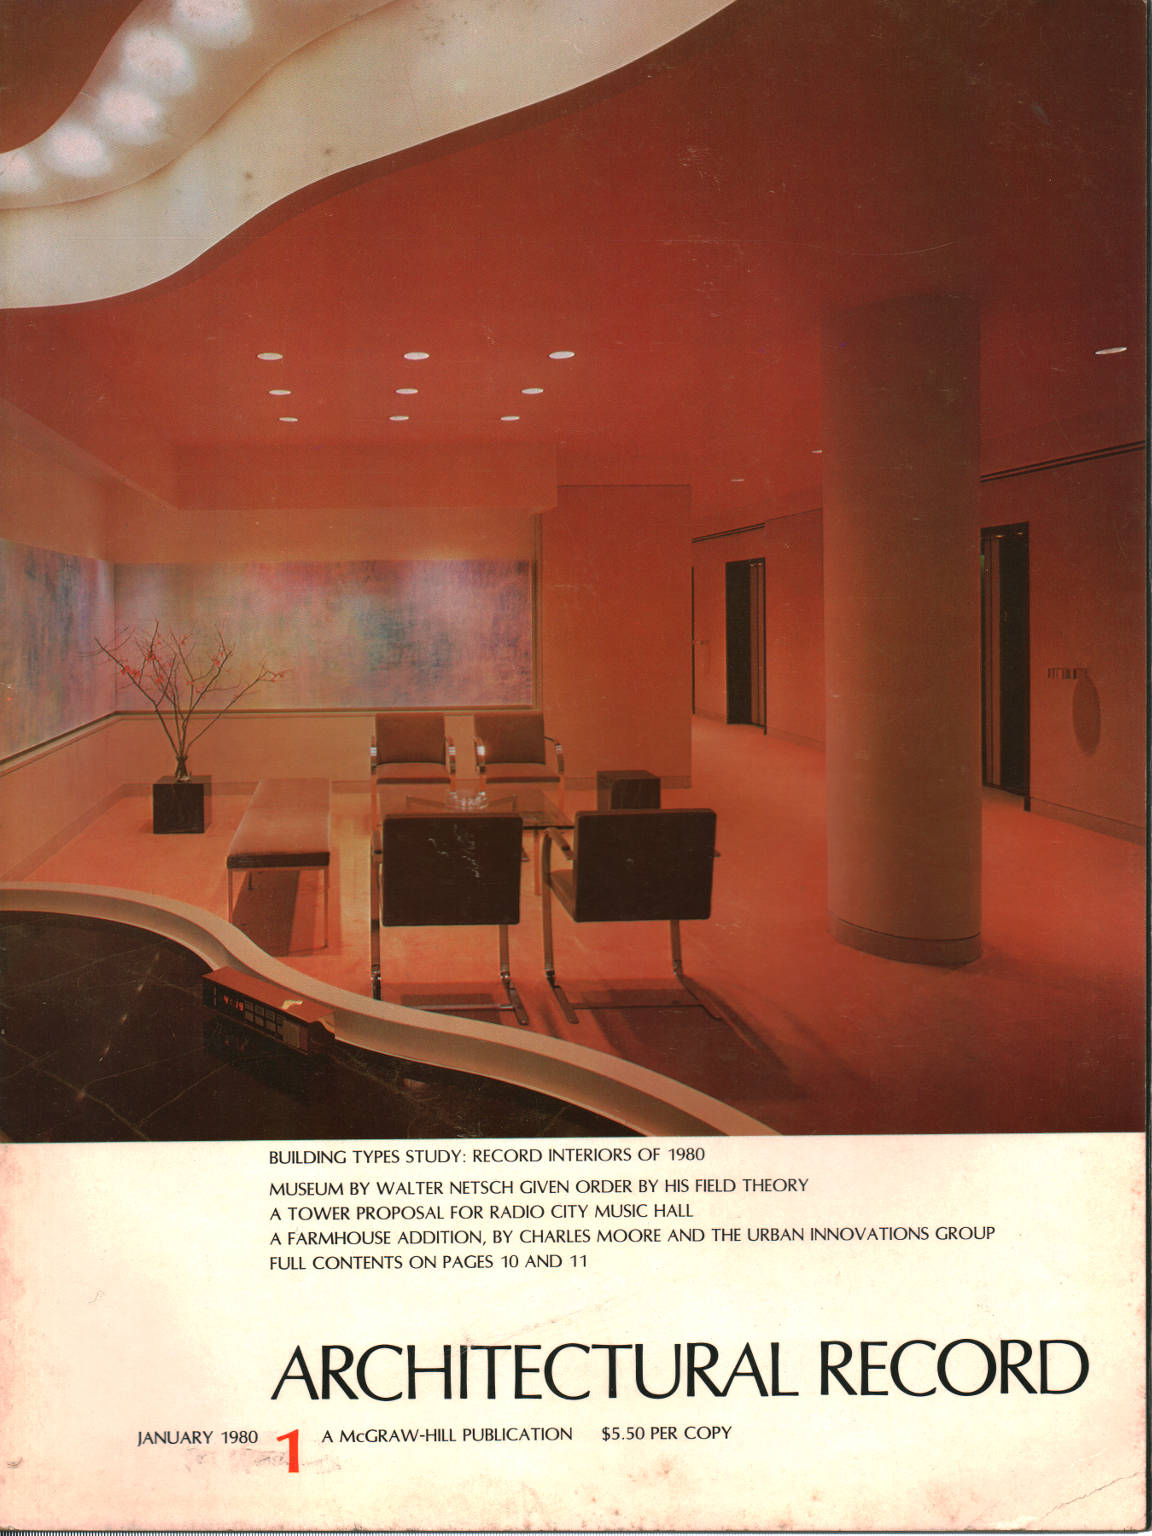 Architectural Record n.1 Jenuary 1980, AA.VV.